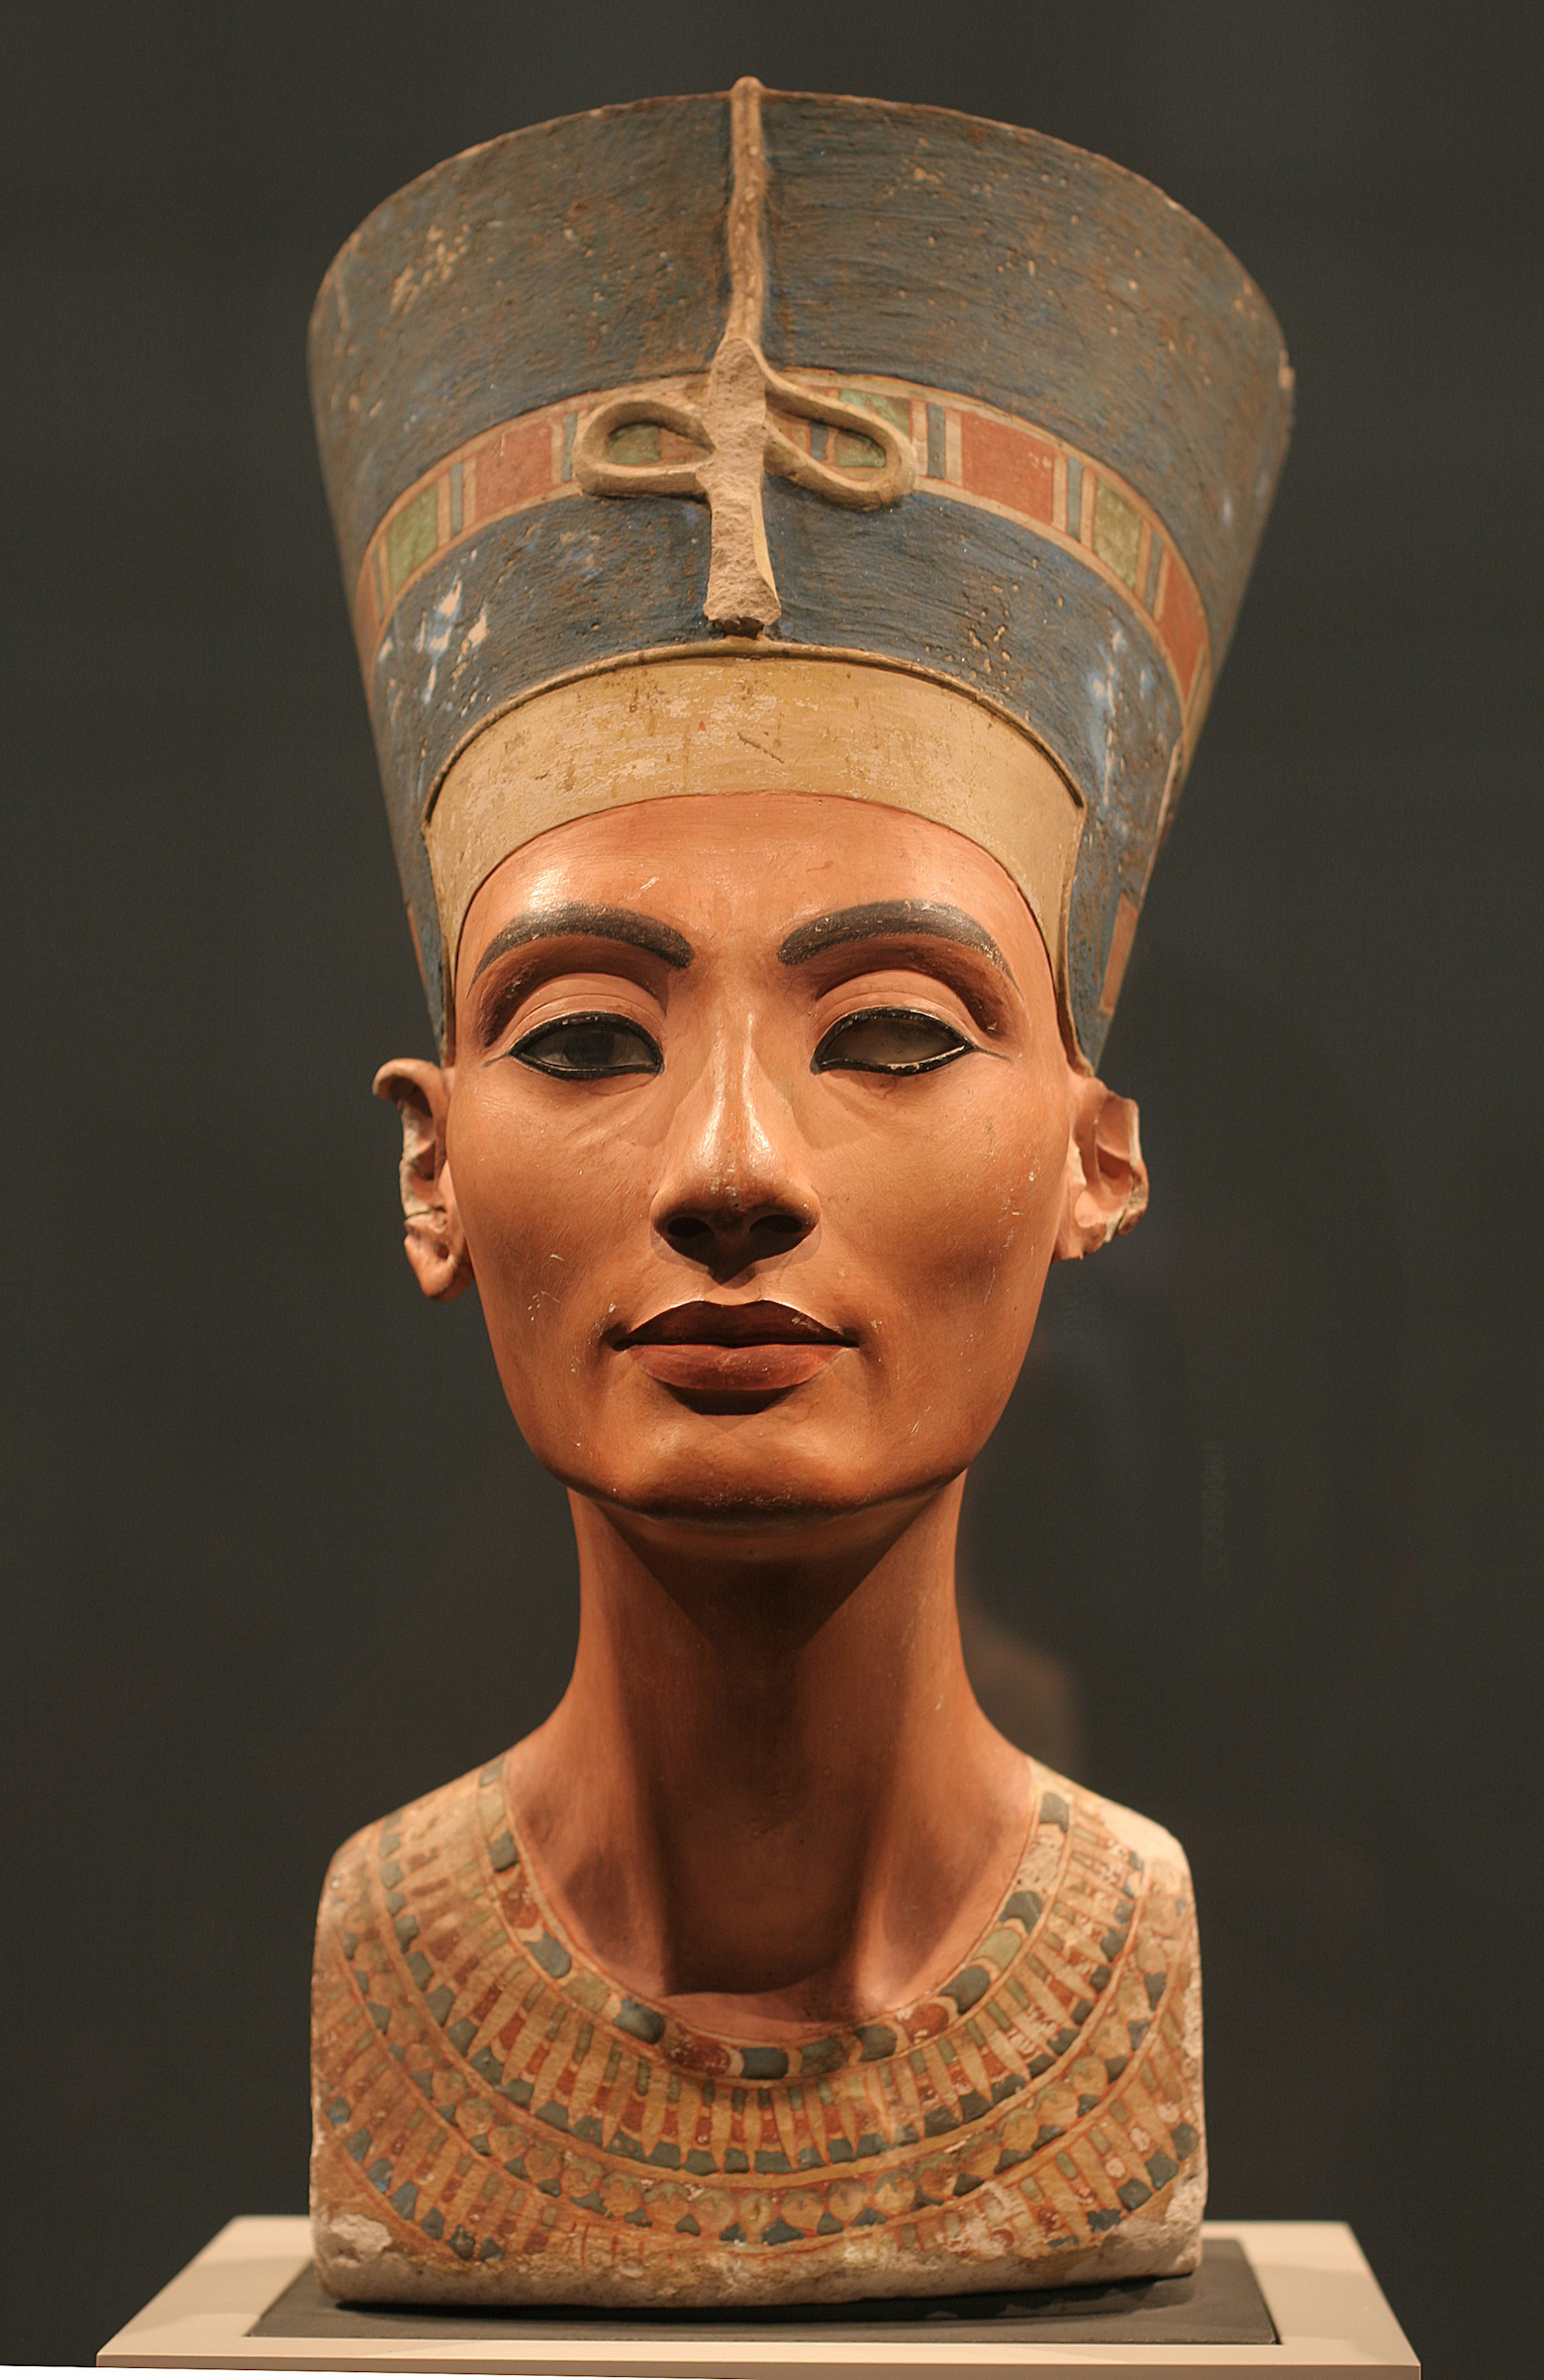 The Nefertiti Bust, ca 1350 BC. Found in the collection of the Staatliche Museen, Berlin. (Heritage Images/Getty Images)